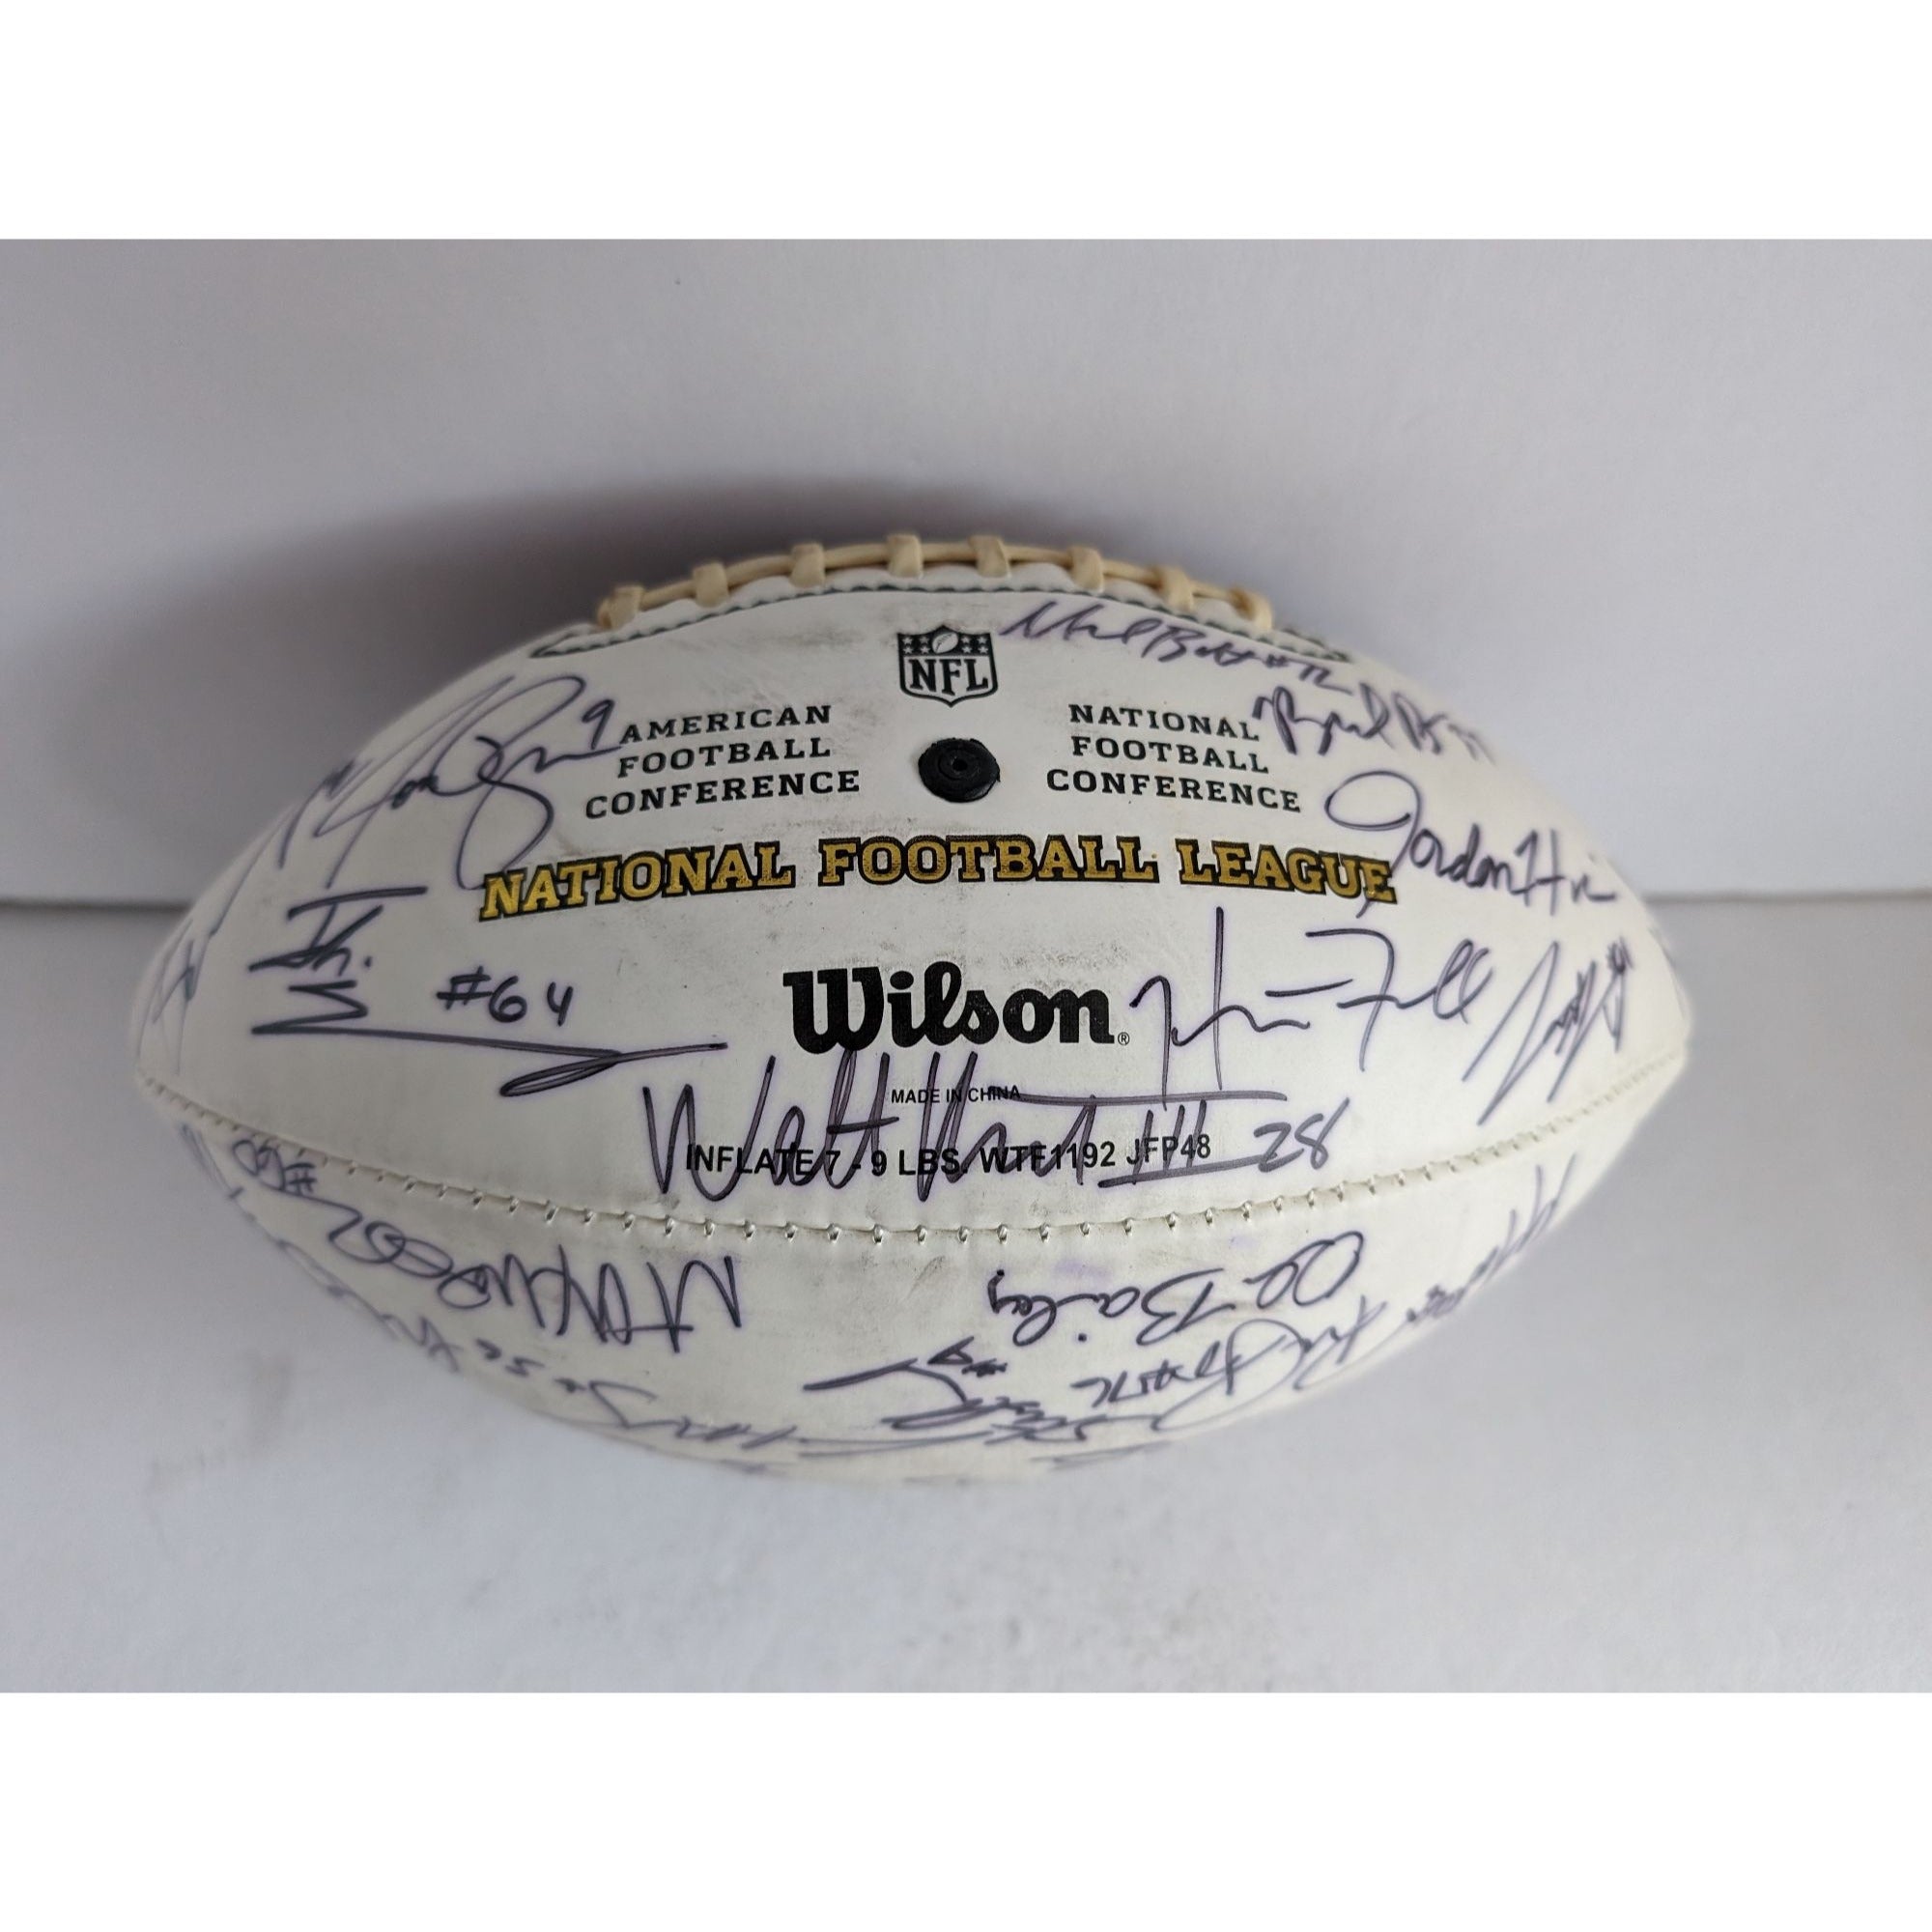 Seattle Seahawks 2013-2014 Super Bowl champions team signed football 40 signatures Russell Wilson Marshawn Lynch Pete Carroll the Legion of